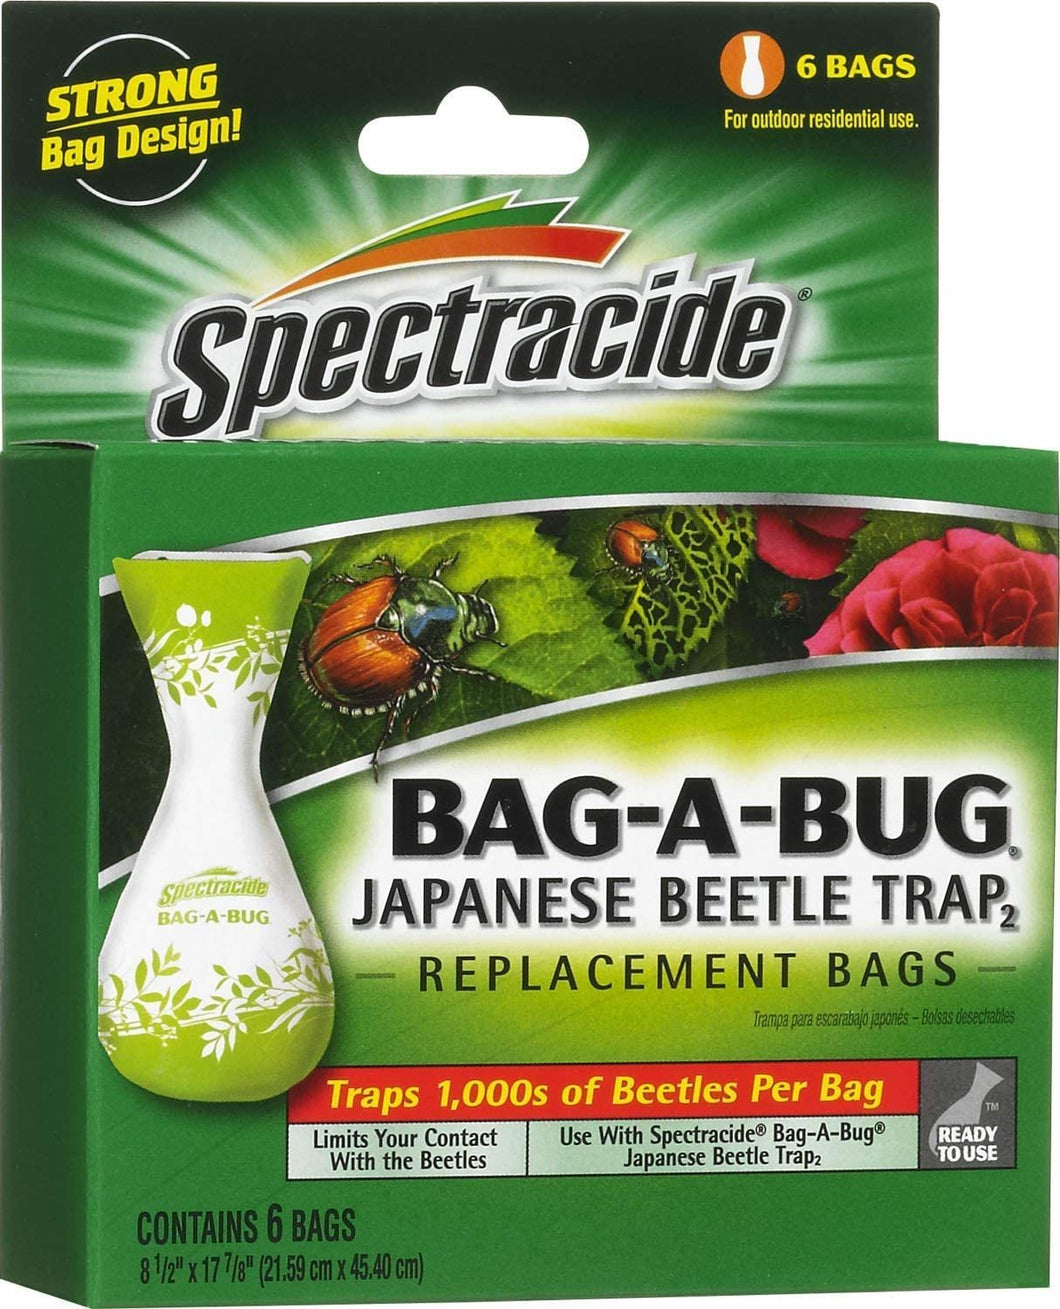 Spectracide Bag-A-Bug Japanese Beetle Trap2-24 Bags Total (4 Packages with 6 Bags Each)